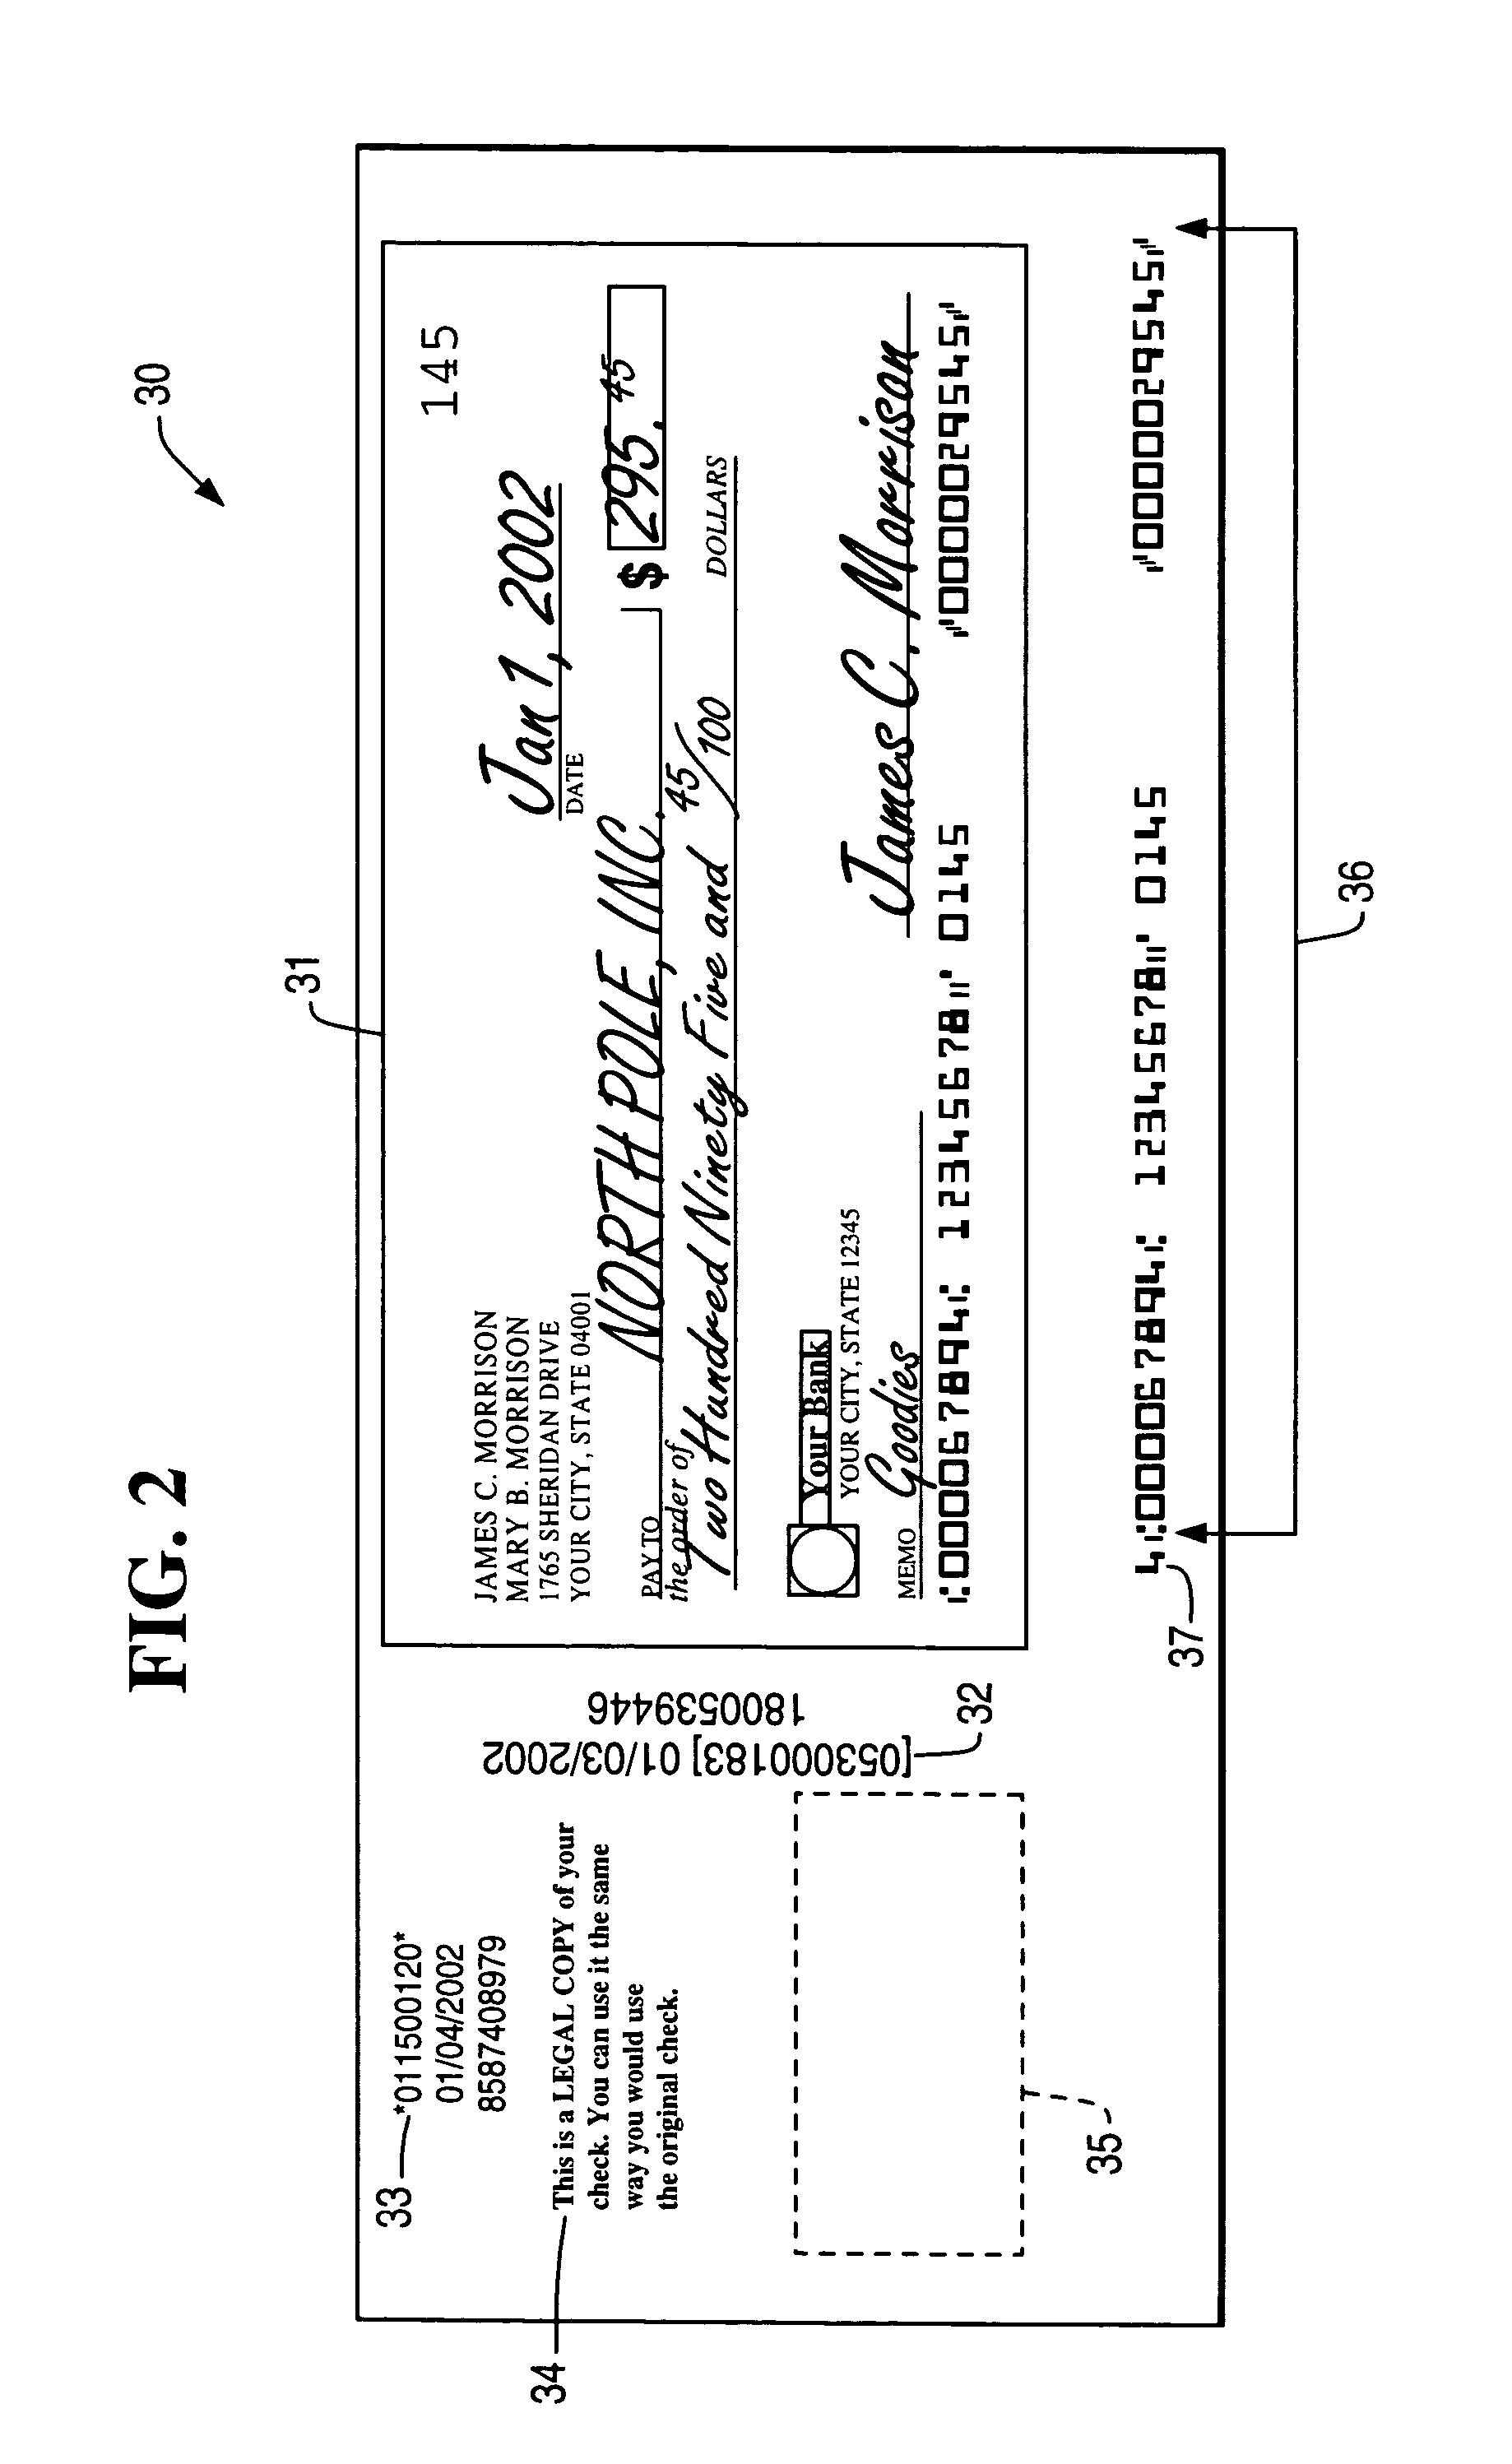 Method of creating an image replacement document for use in a check truncation environment and an apparatus therefor